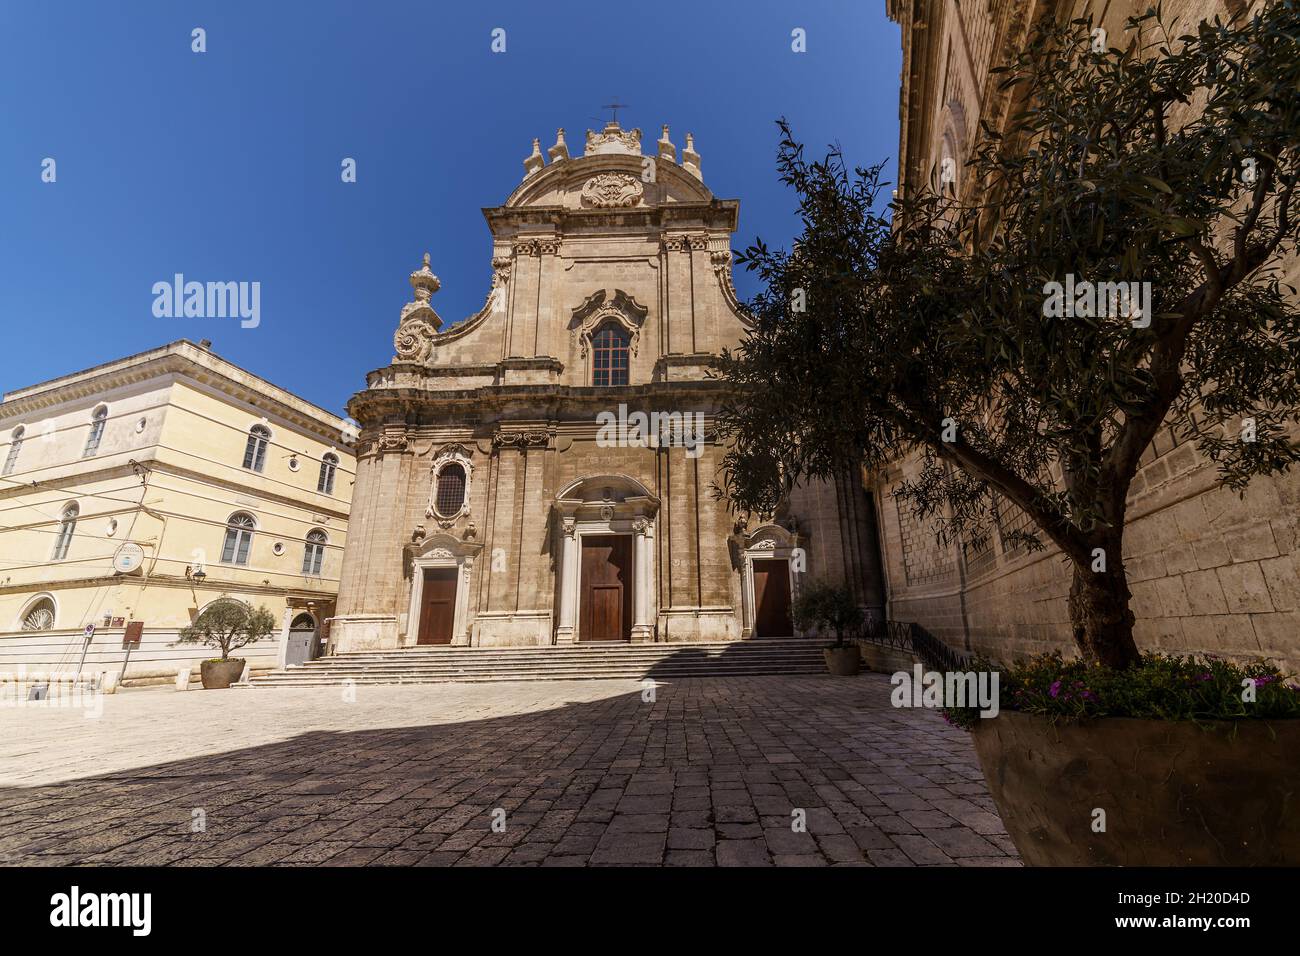 View of Cathedral of Maria Santissima della Madia in the ancient city of Monopoli, province of Bari, region of Apulia, southern Italy. Stock Photo